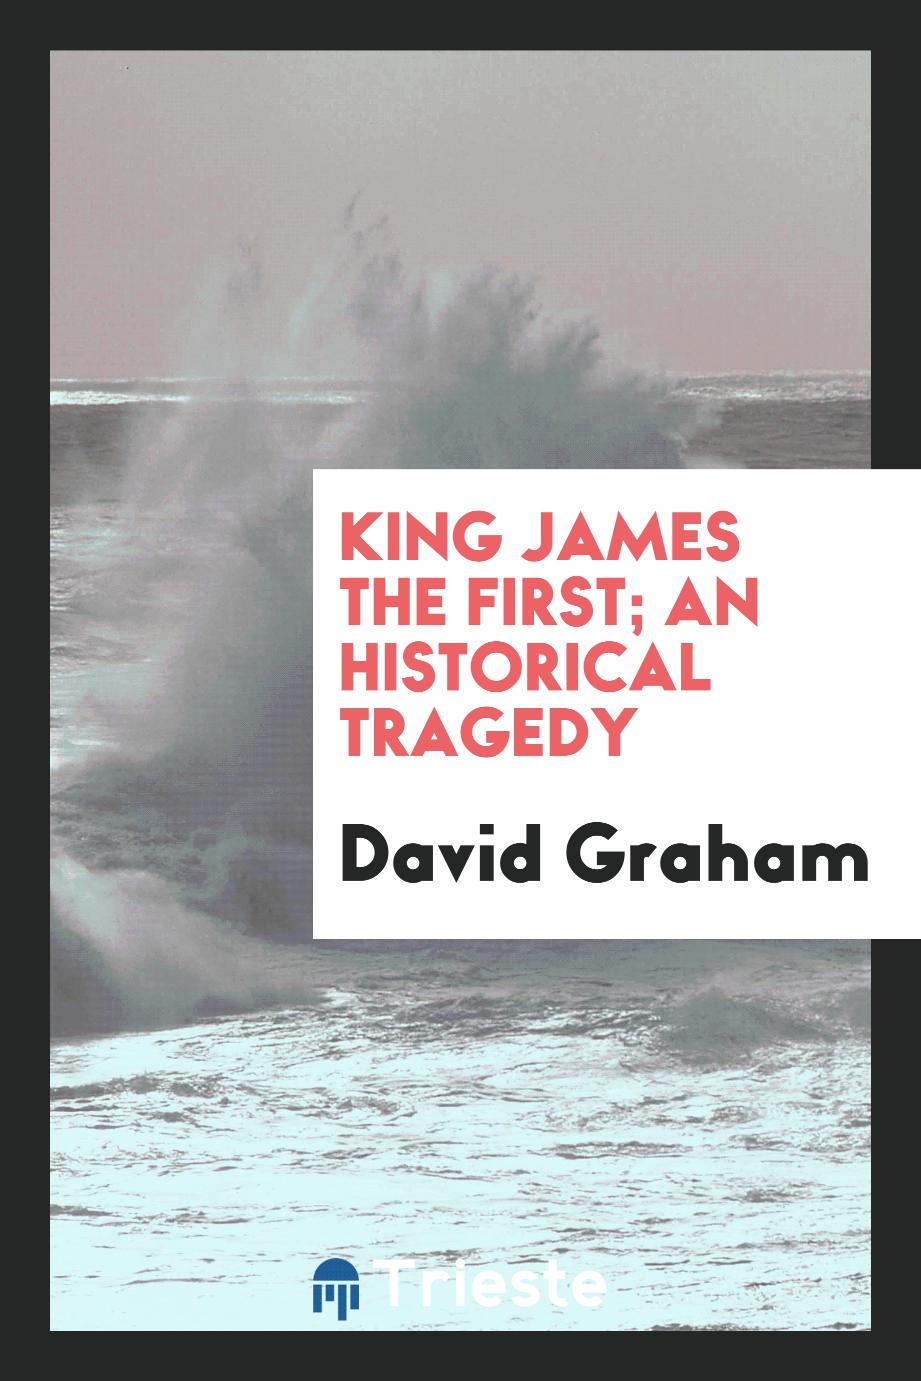 King James the First; an historical tragedy